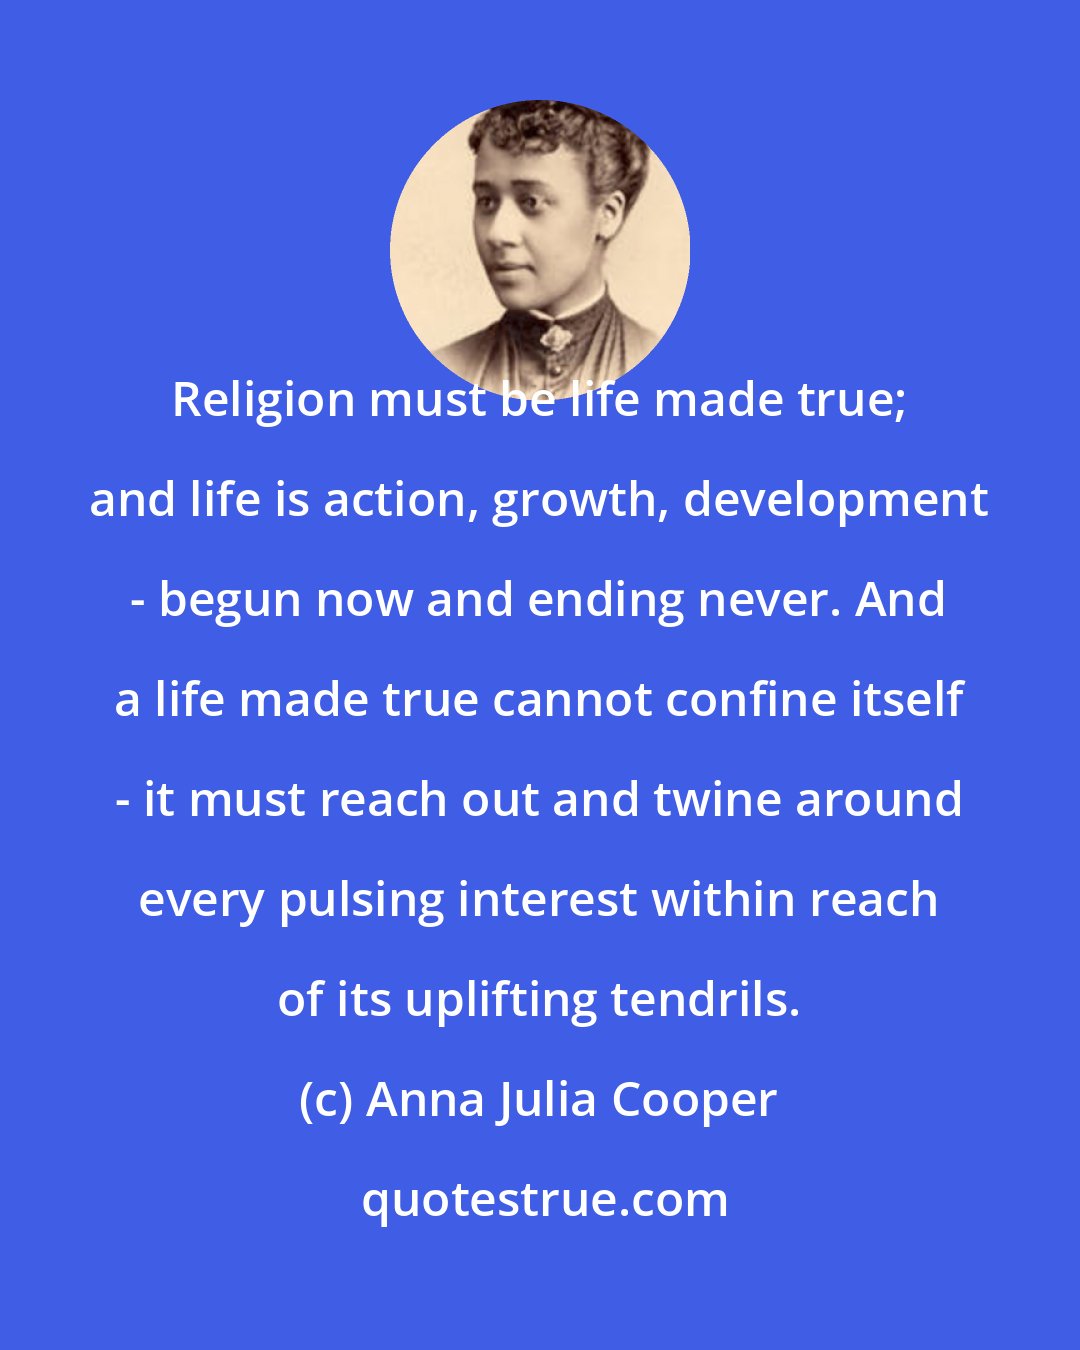 Anna Julia Cooper: Religion must be life made true; and life is action, growth, development - begun now and ending never. And a life made true cannot confine itself - it must reach out and twine around every pulsing interest within reach of its uplifting tendrils.